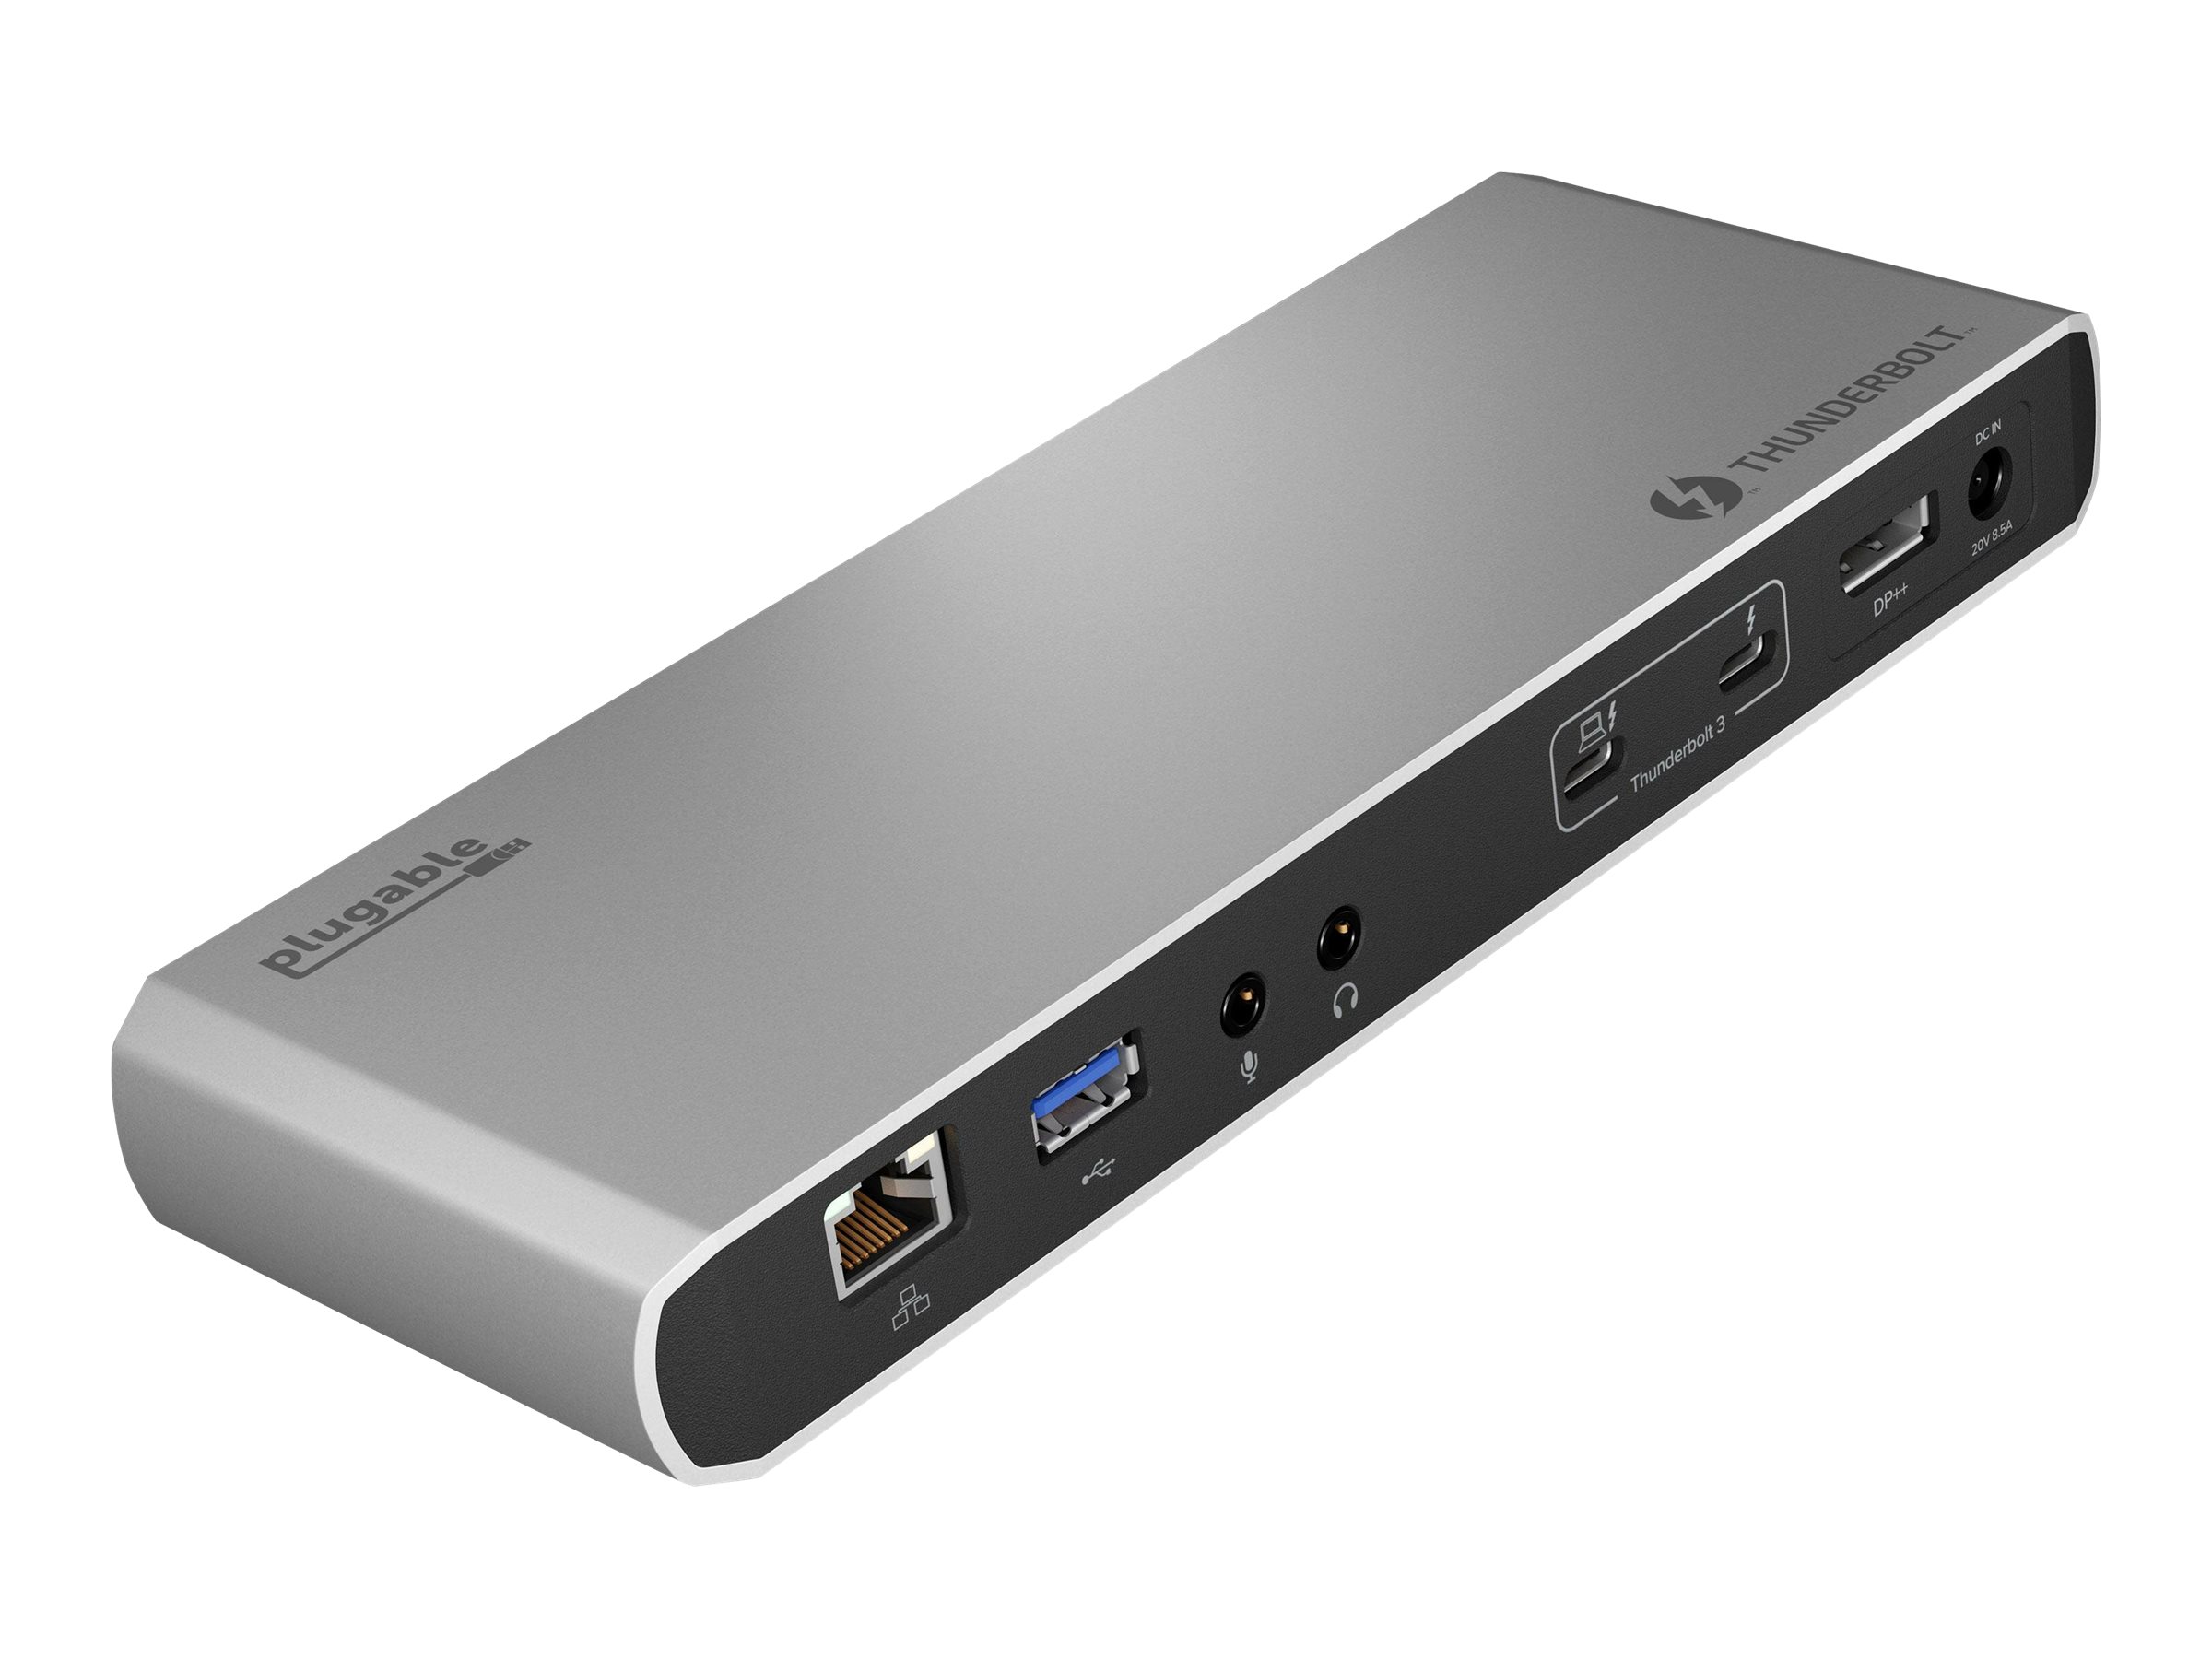 Plugable Thunderbolt 3 Dock Compatible with MacBook Pro and Thunderbolt 3 PCs (4K DisplayPort or HDMI, 1Gb Ethernet, Audio, 3 USB Ports, 85W Charging) - image 1 of 8